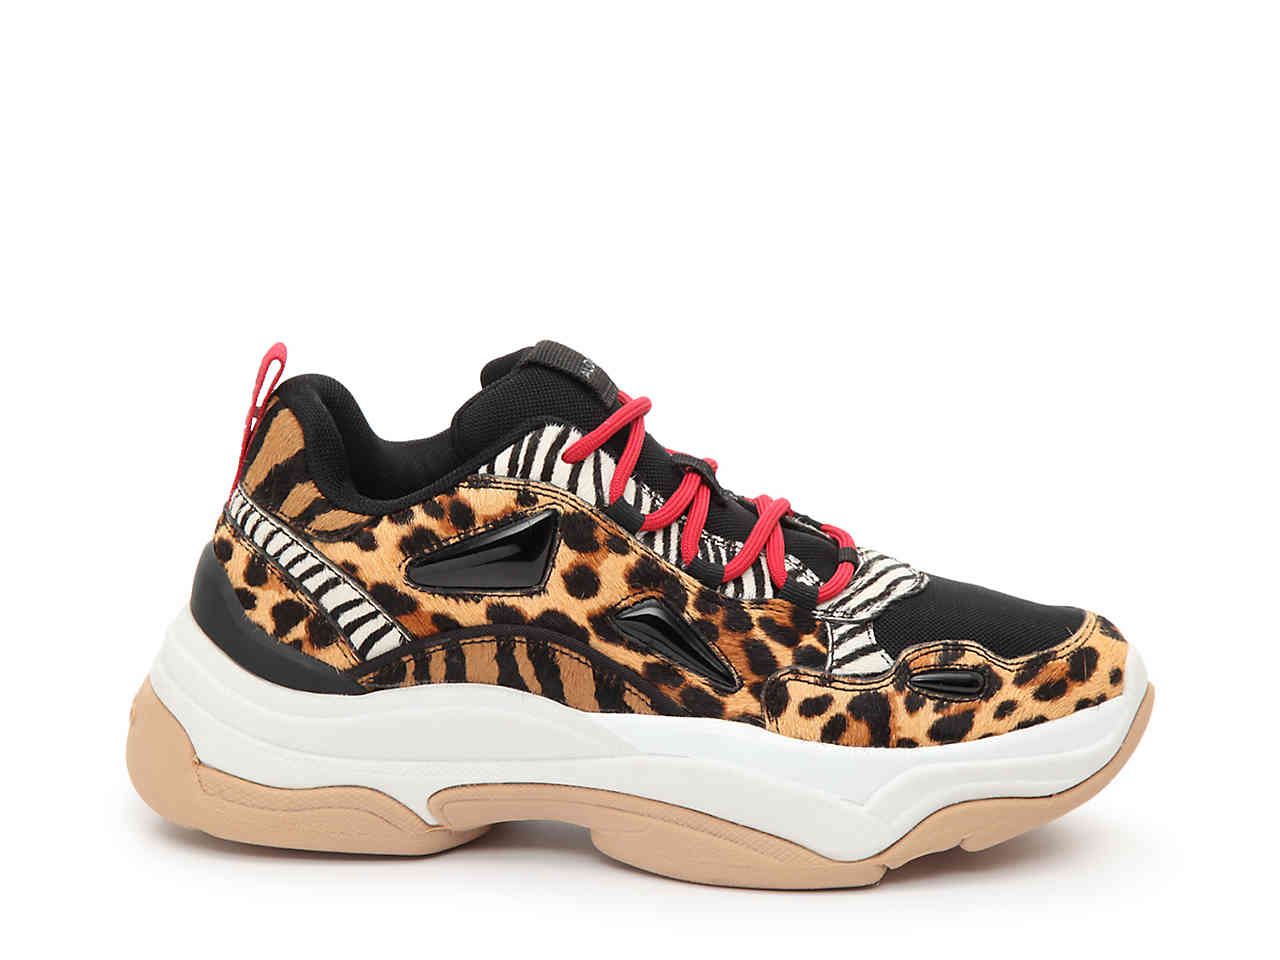 These 20 Leopard Slip-On Sneakers Are So Fierce | Who What Wear